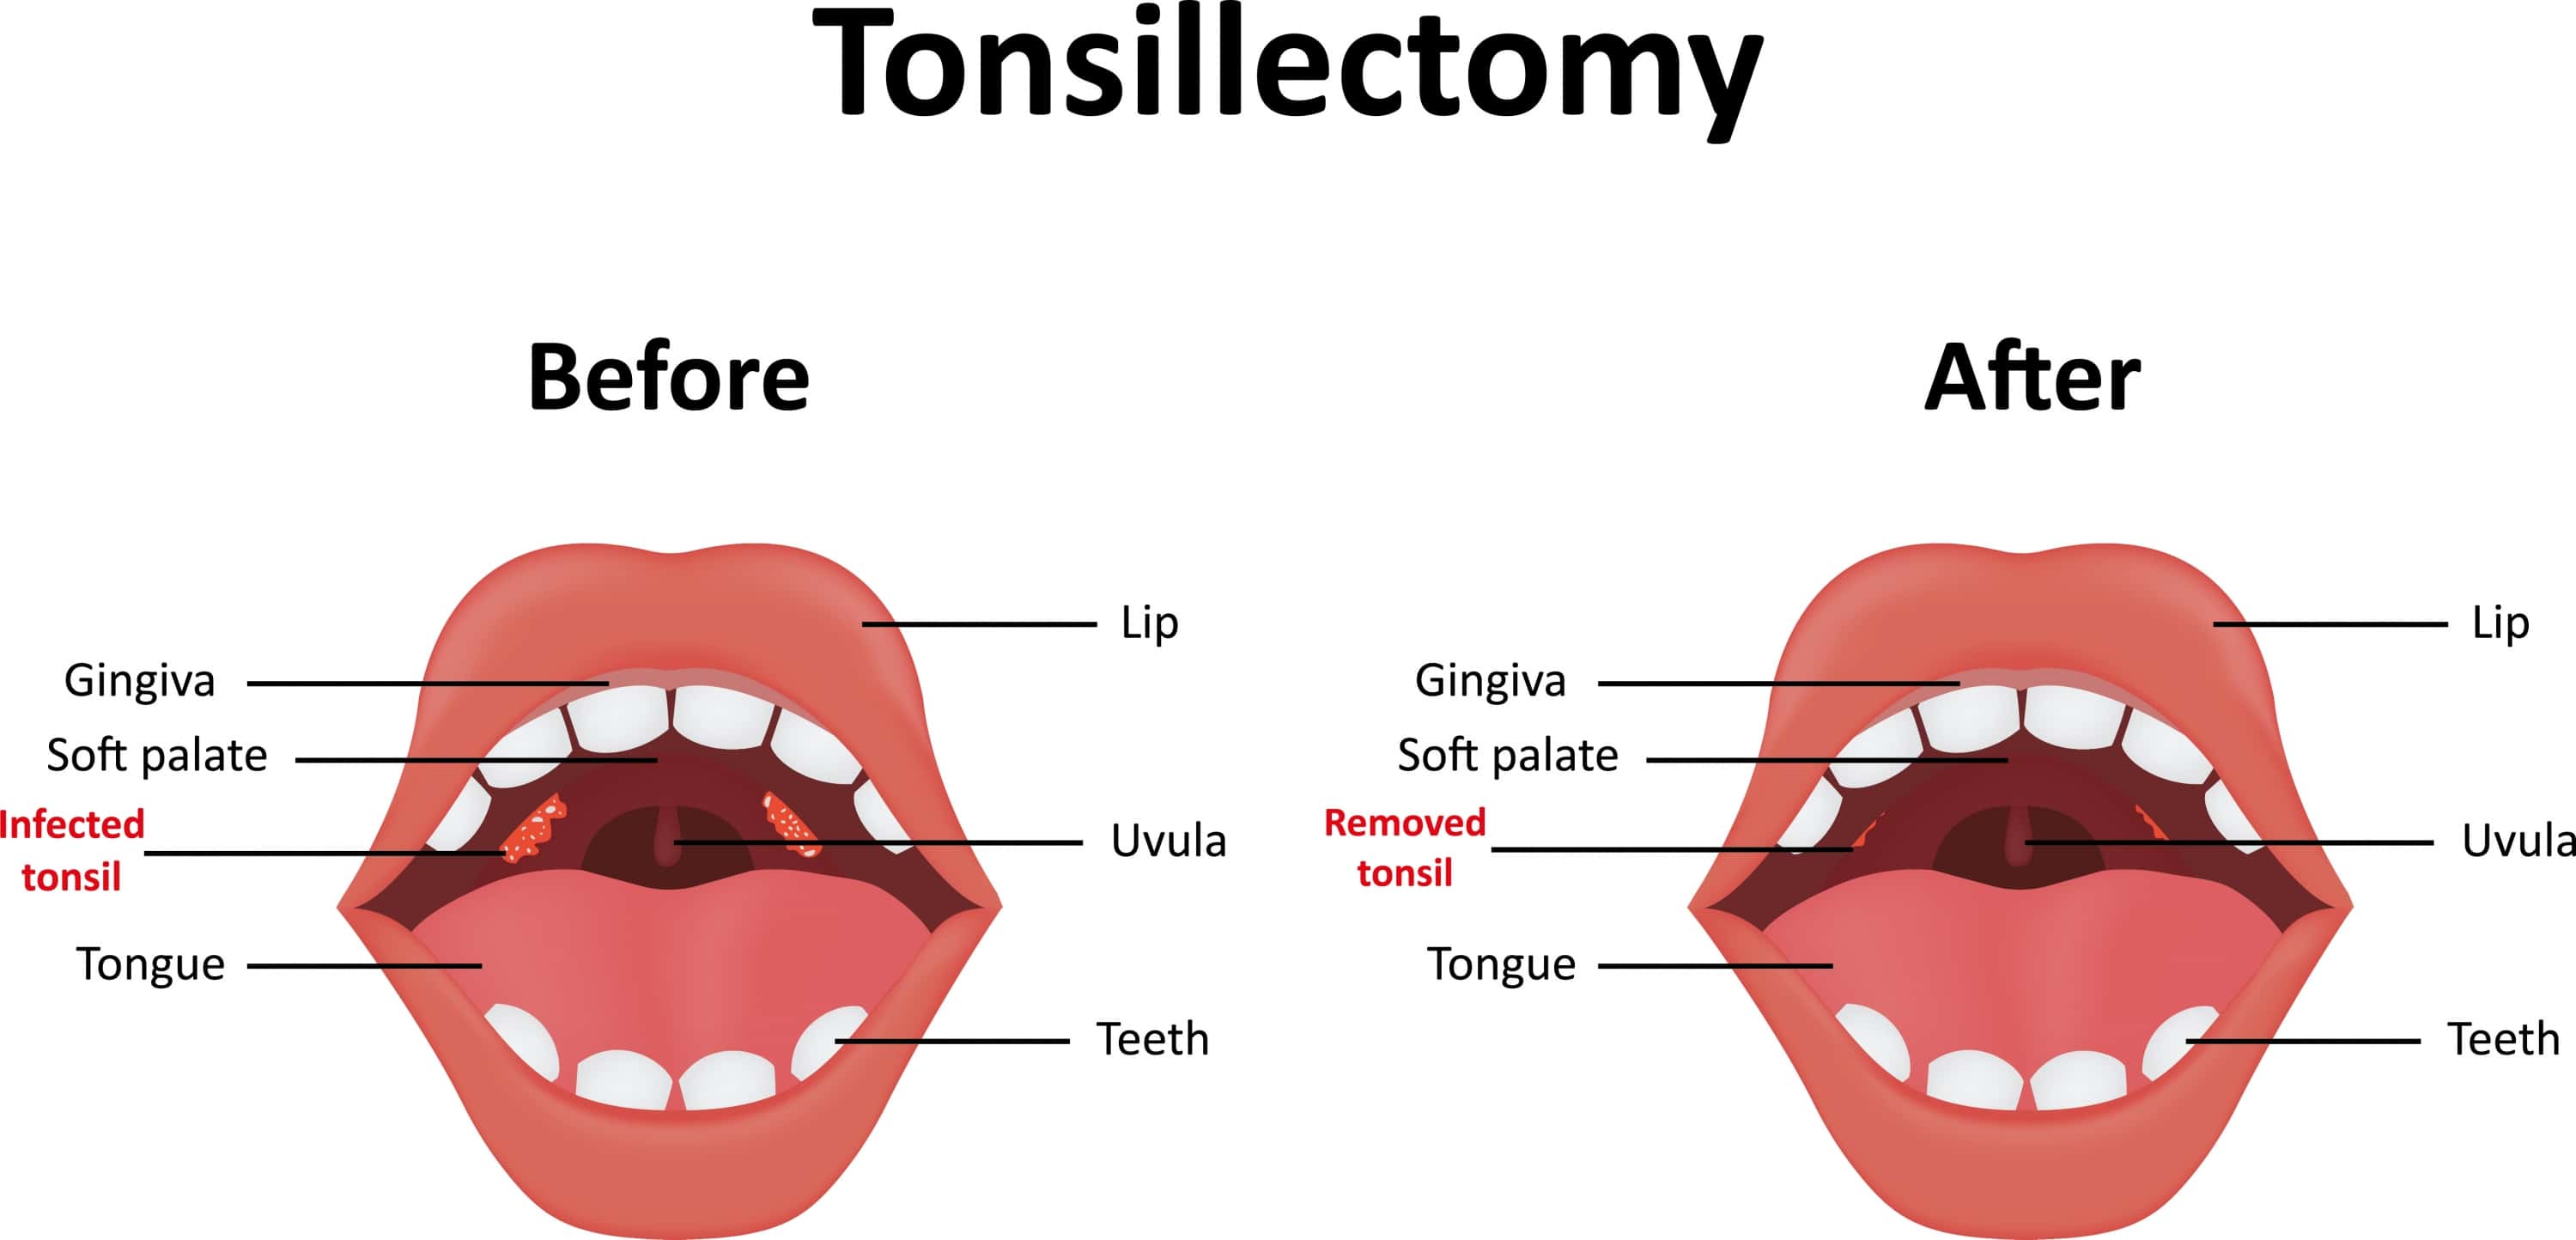 Anesthesia for Tonsillectomy